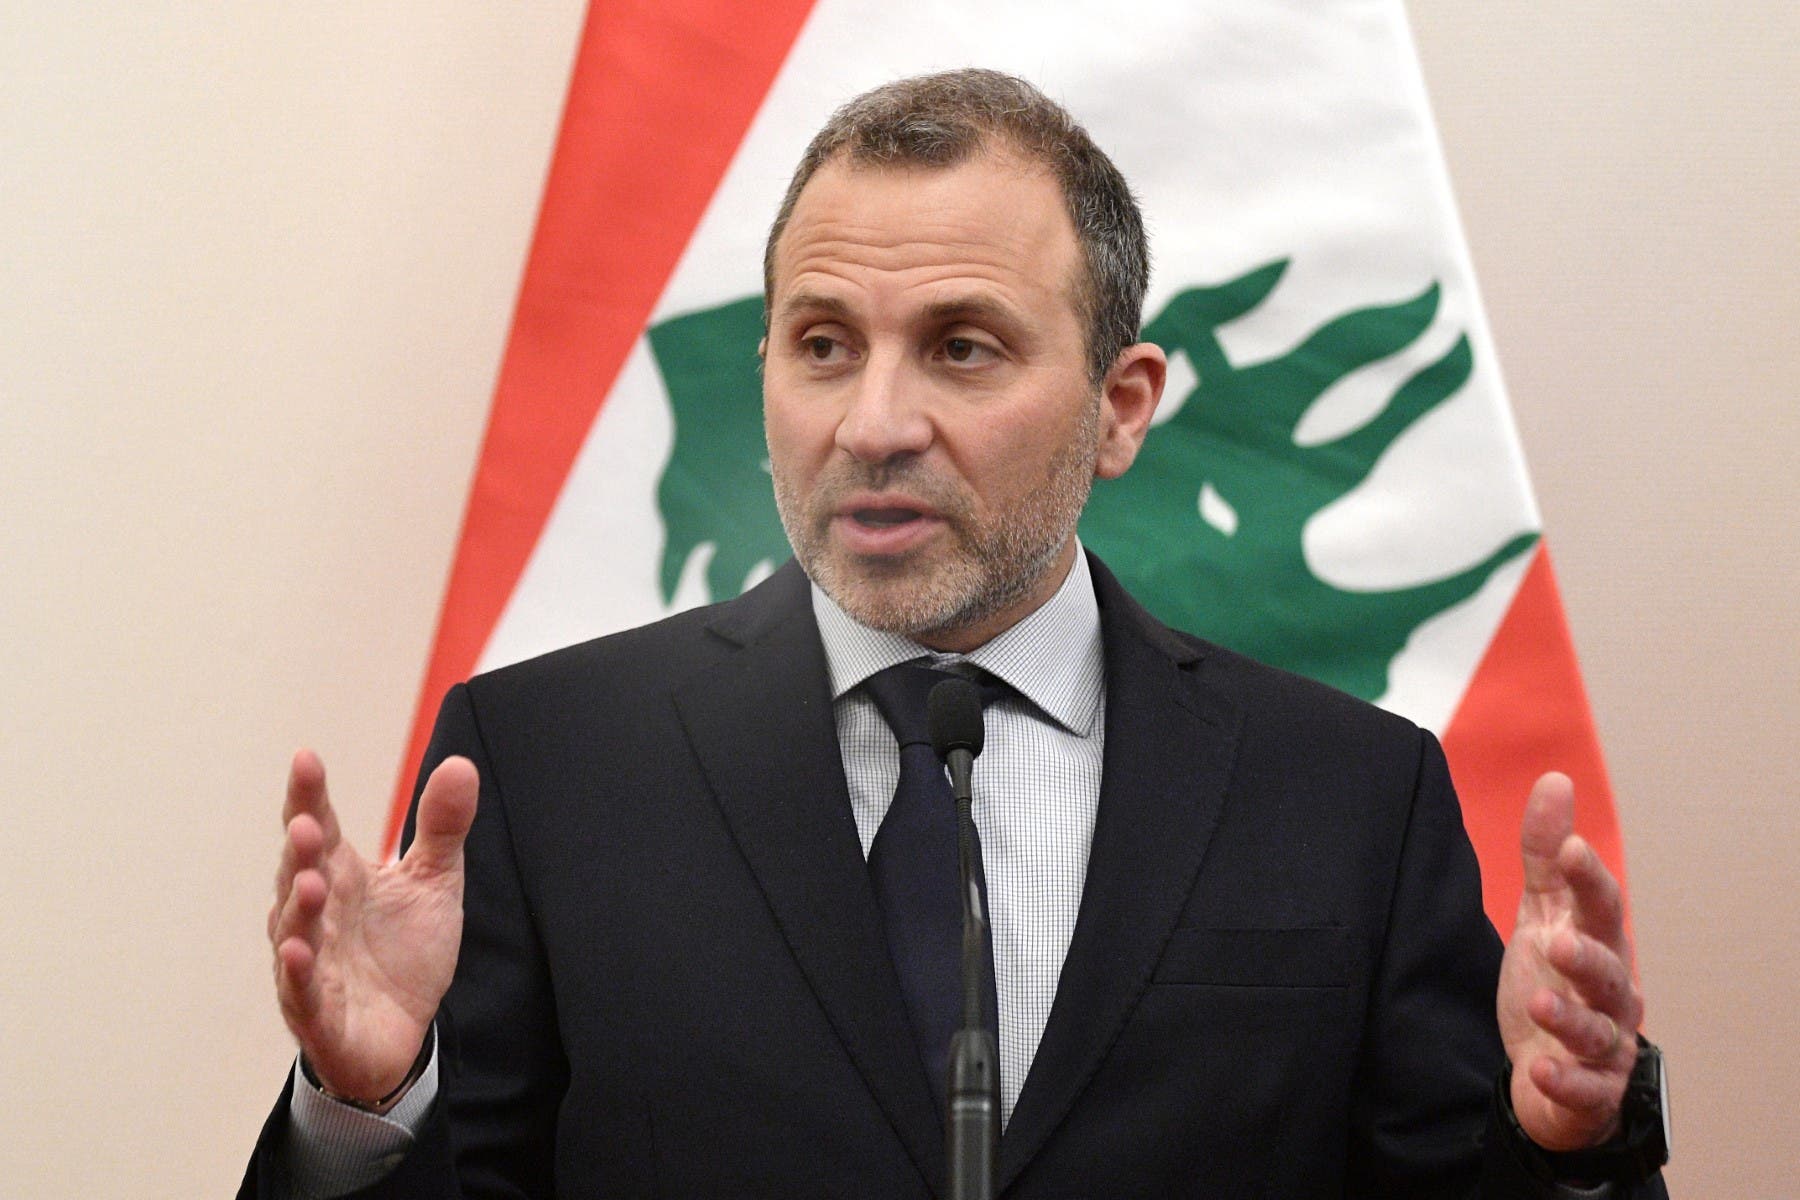 The head of the Free Patriotic Movement Gebran Bassil's strategy is to field candidates in all districts to reduce electoral losses. (File photo: AFP)